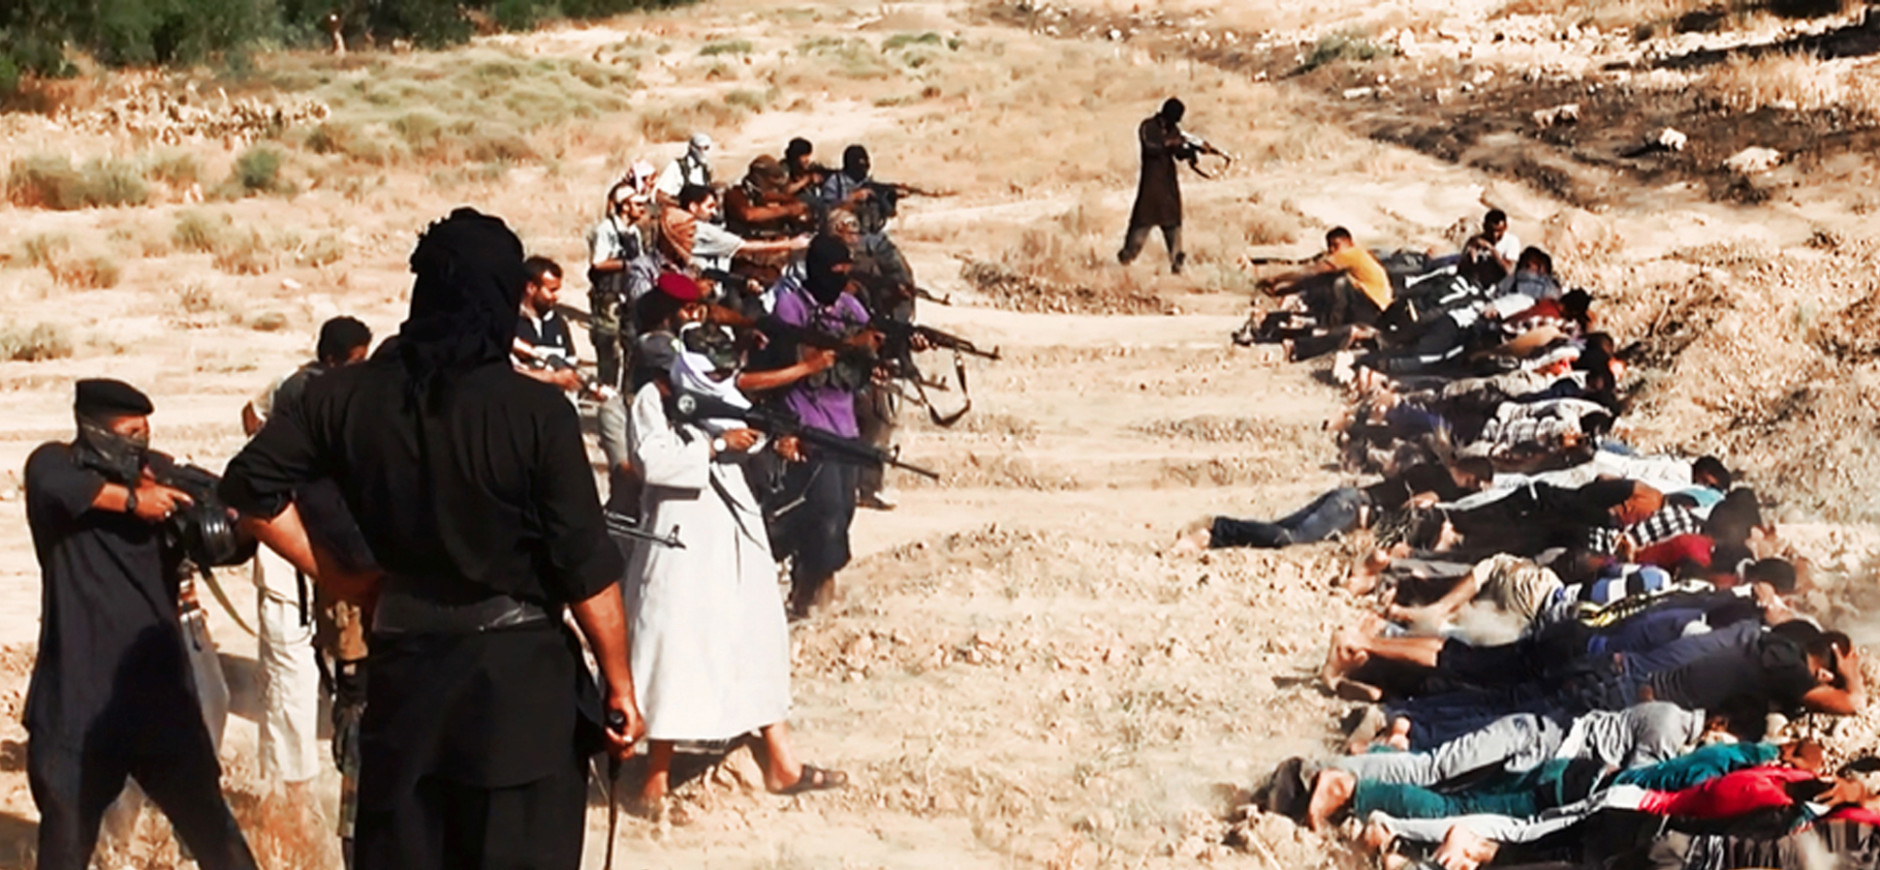 FOR USE AS DESIRED, YEAR END PHOTOS - FILE - This image posted on a militant website on Saturday, June 14, 2014, which has been verified and is consistent with other AP reporting, appears to show militants from the al-Qaida-inspired Islamic State of Iraq and the Levant (ISIL) taking aim at captured Iraqi soldiers wearing plain clothes after taking over a base in Tikrit, Iraq.  (AP Photo via militant website, File)